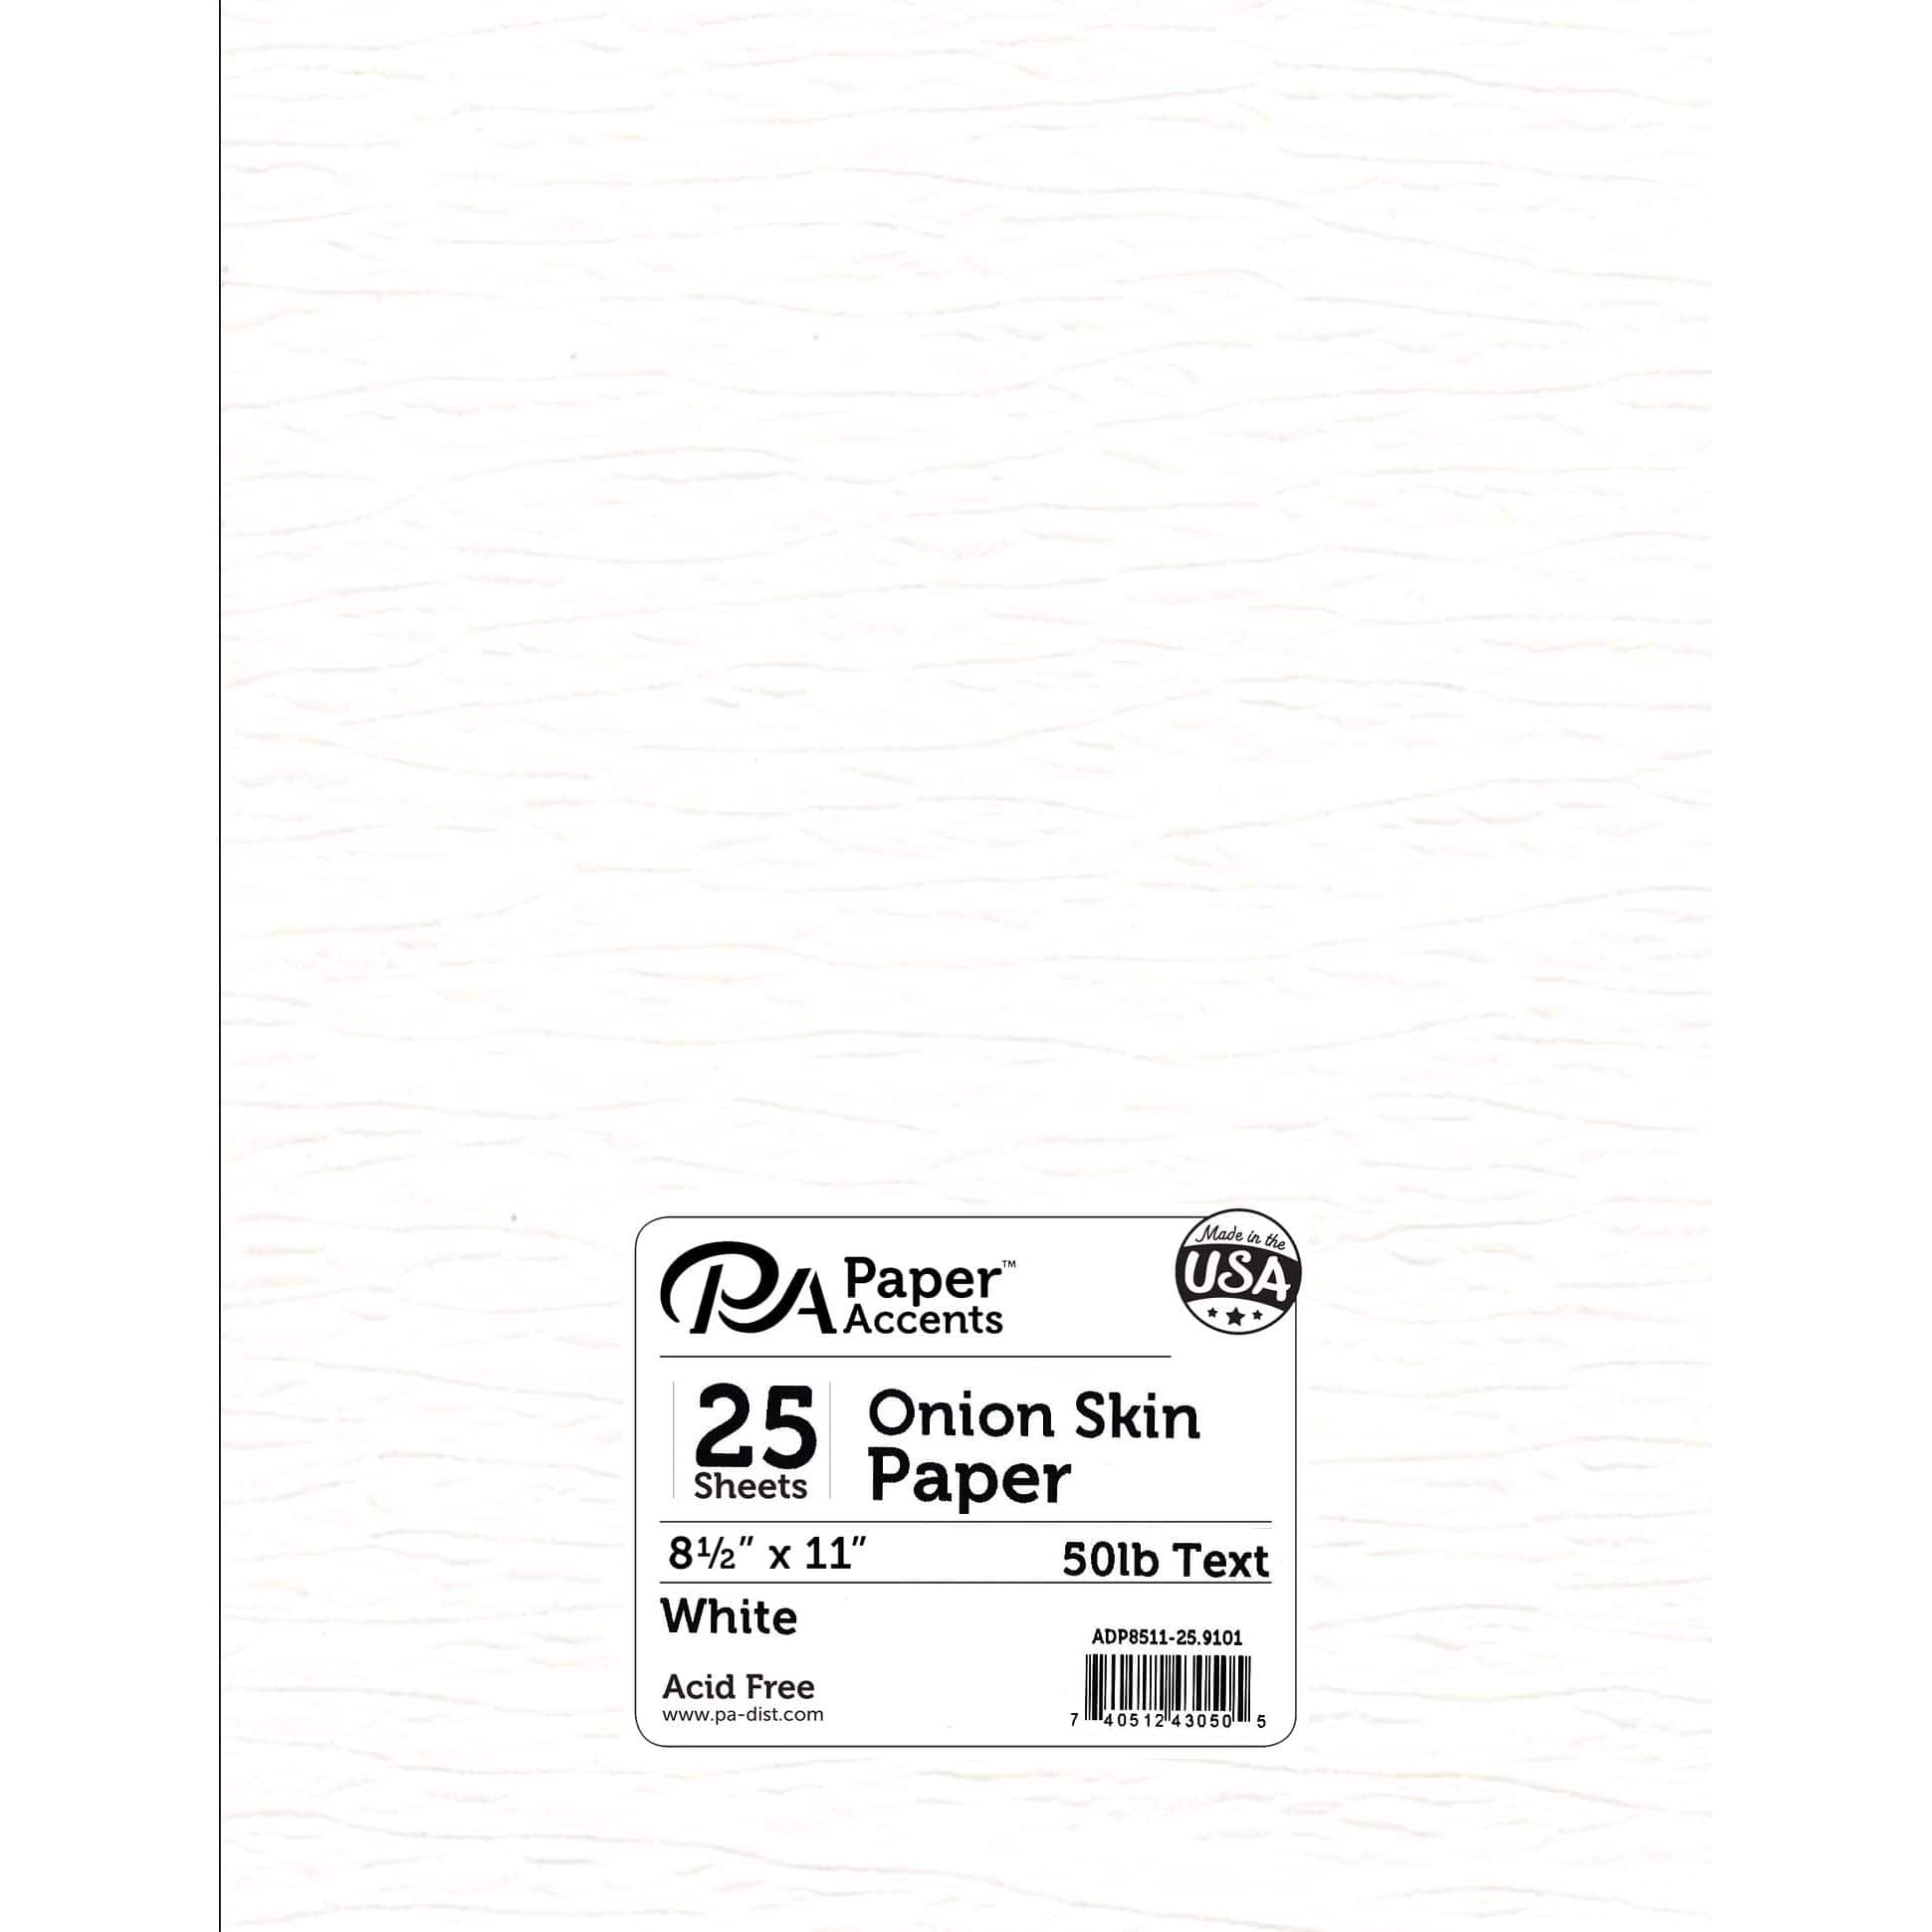 100 Pack Glassine Paper Sheets (8.5 x 11 In) - Onion Skin Paper